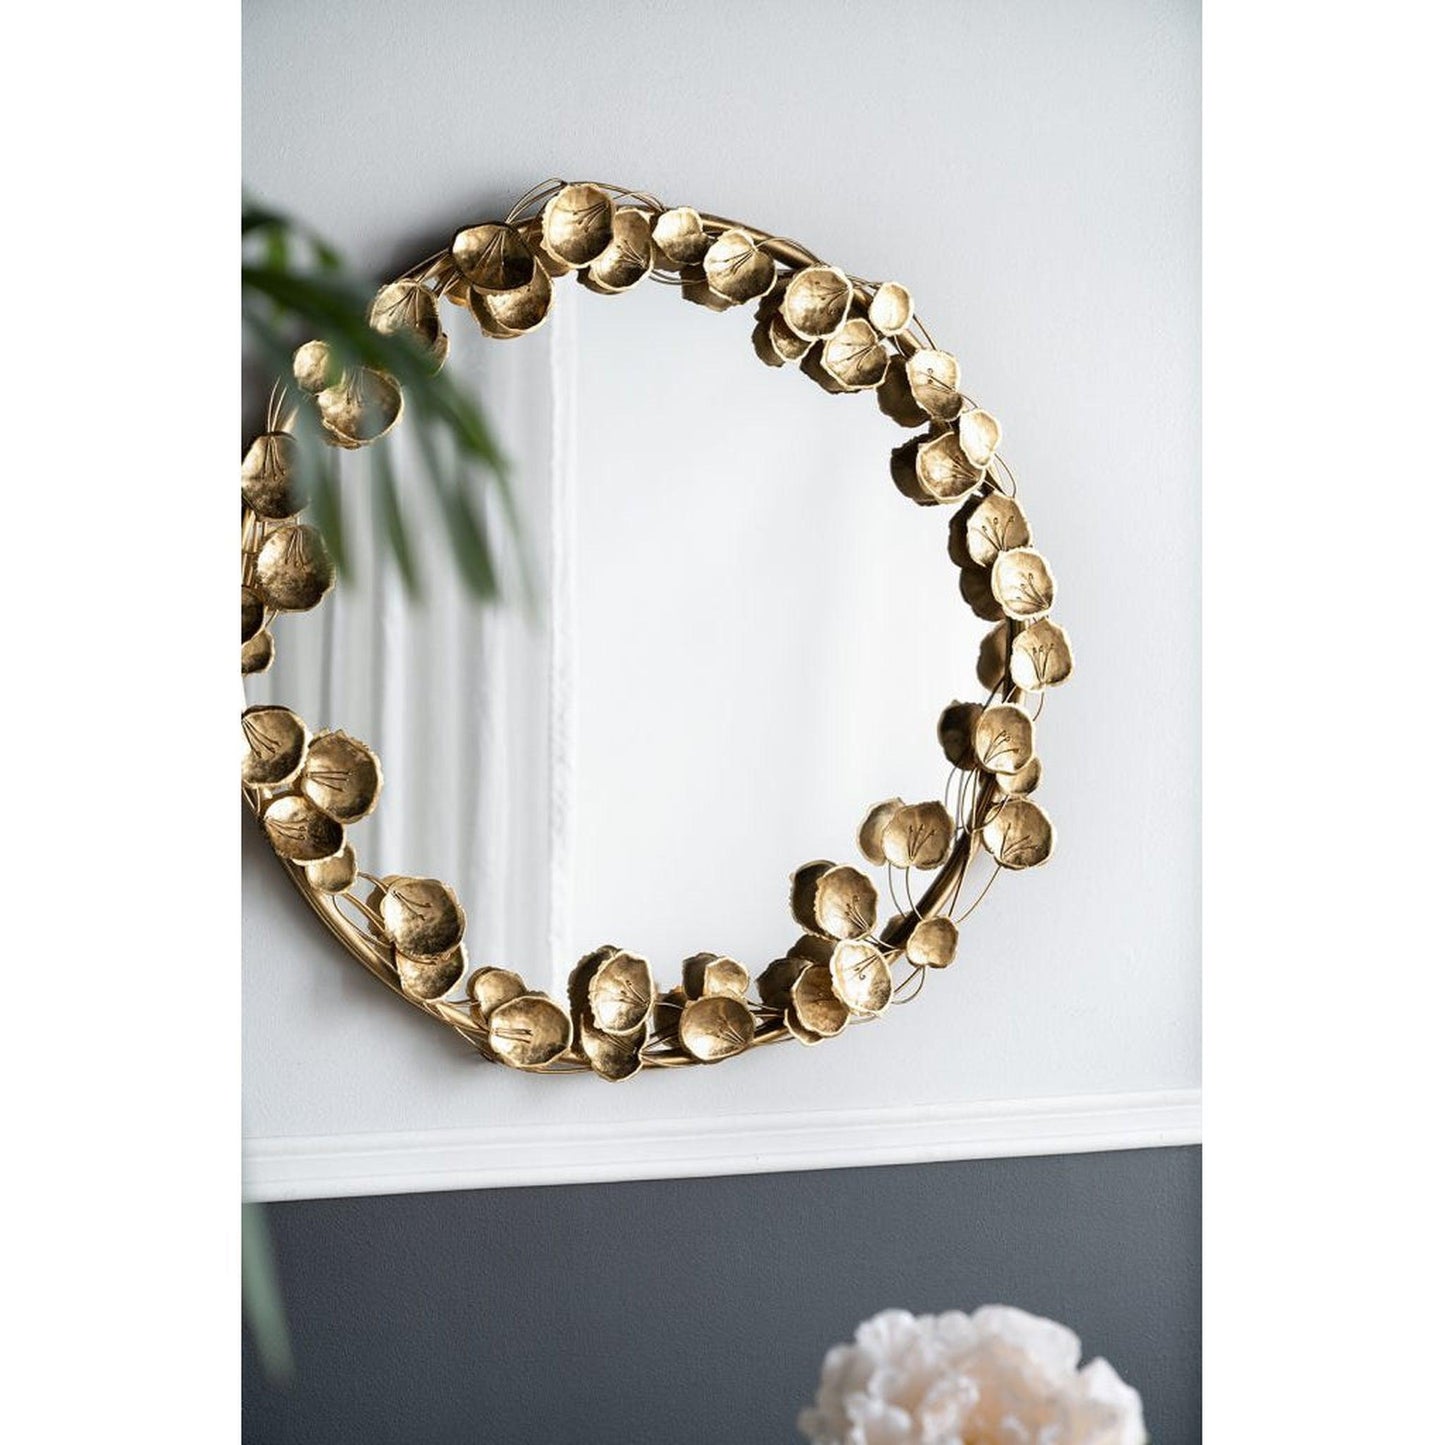 A&B Home 35" x 35" Bundle of 10 Round Gold Metal Frame Wall-Mounted Mirror With Golden Leaf Accent